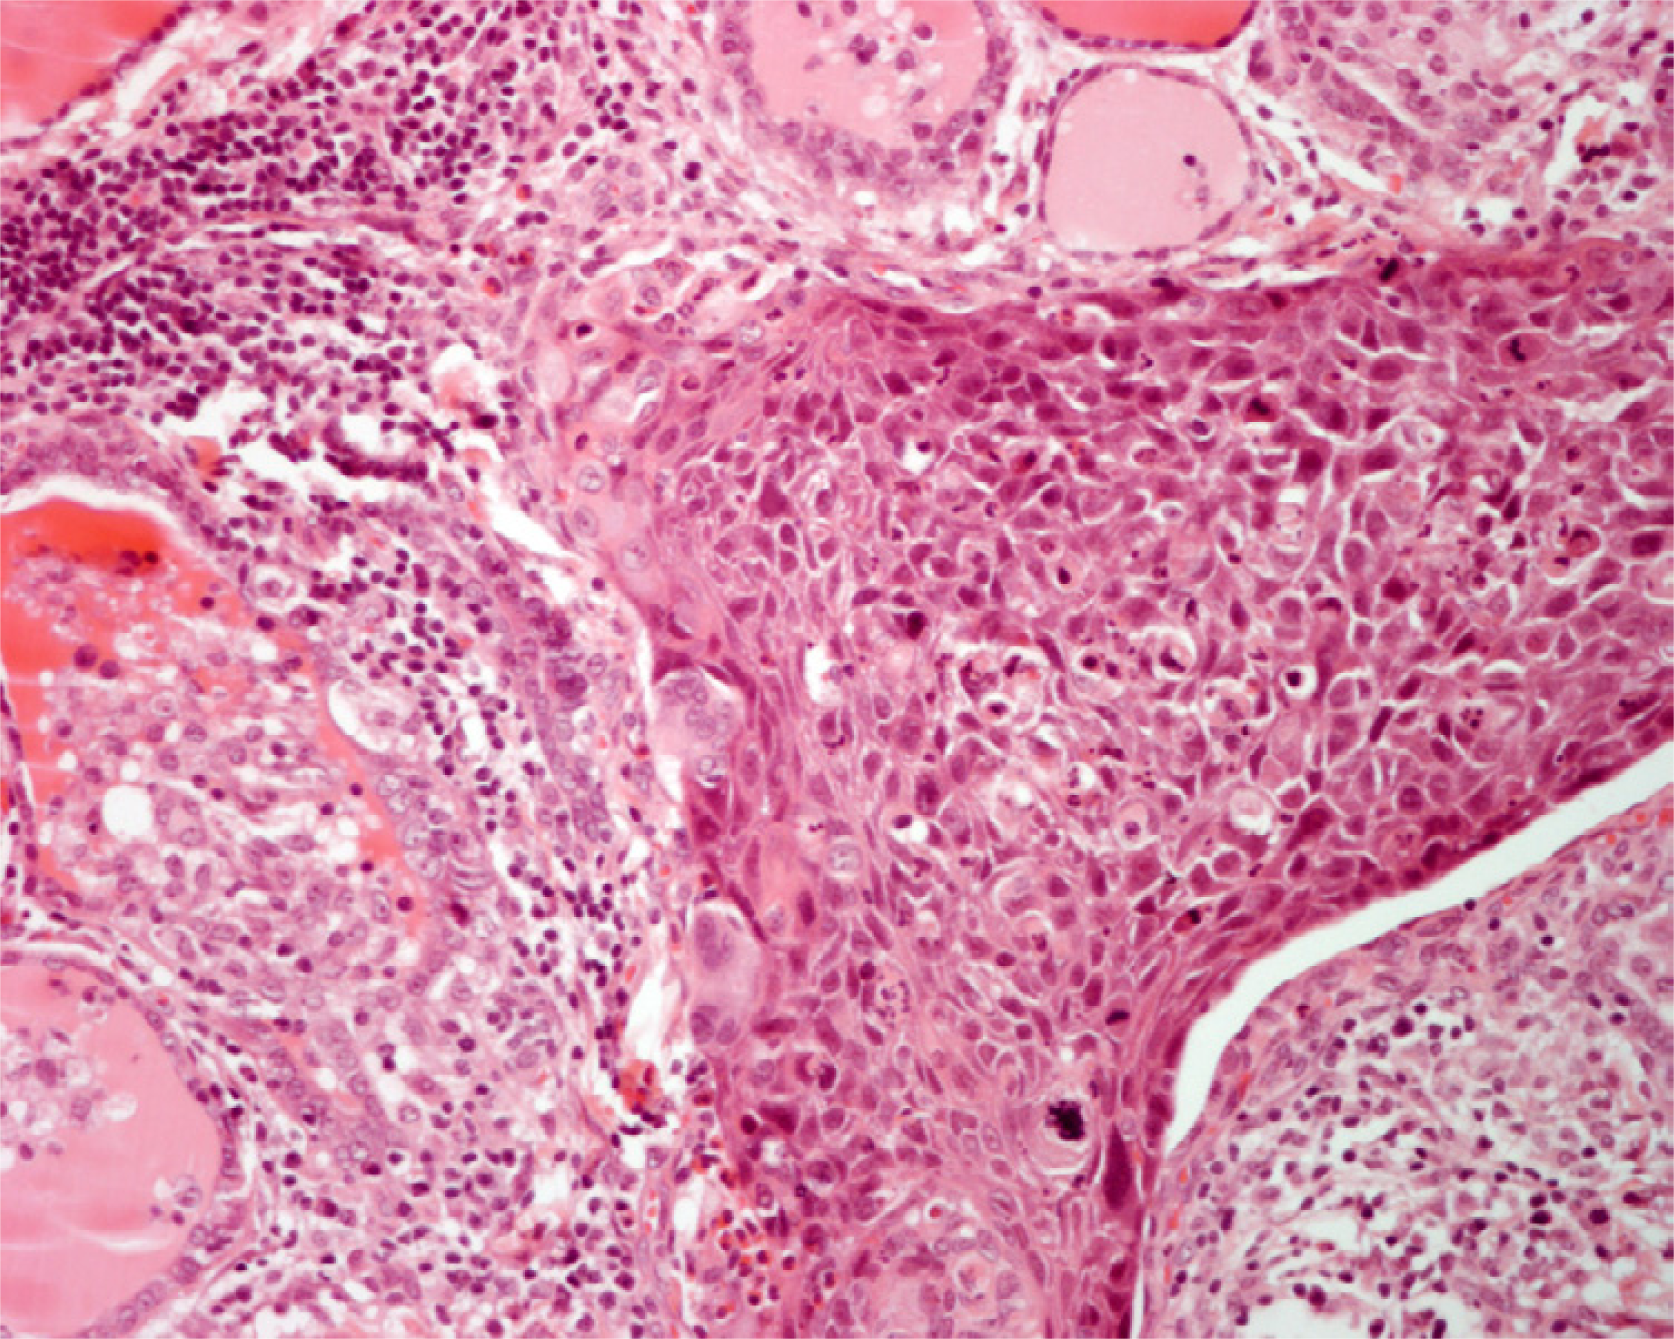 Histology of a moderately differentiated squamous cell carcinoma metastatic to the thyroid in patient 1. Residual thyroid follicles are present elsewhere (hematoxylin and eosin, × 250).